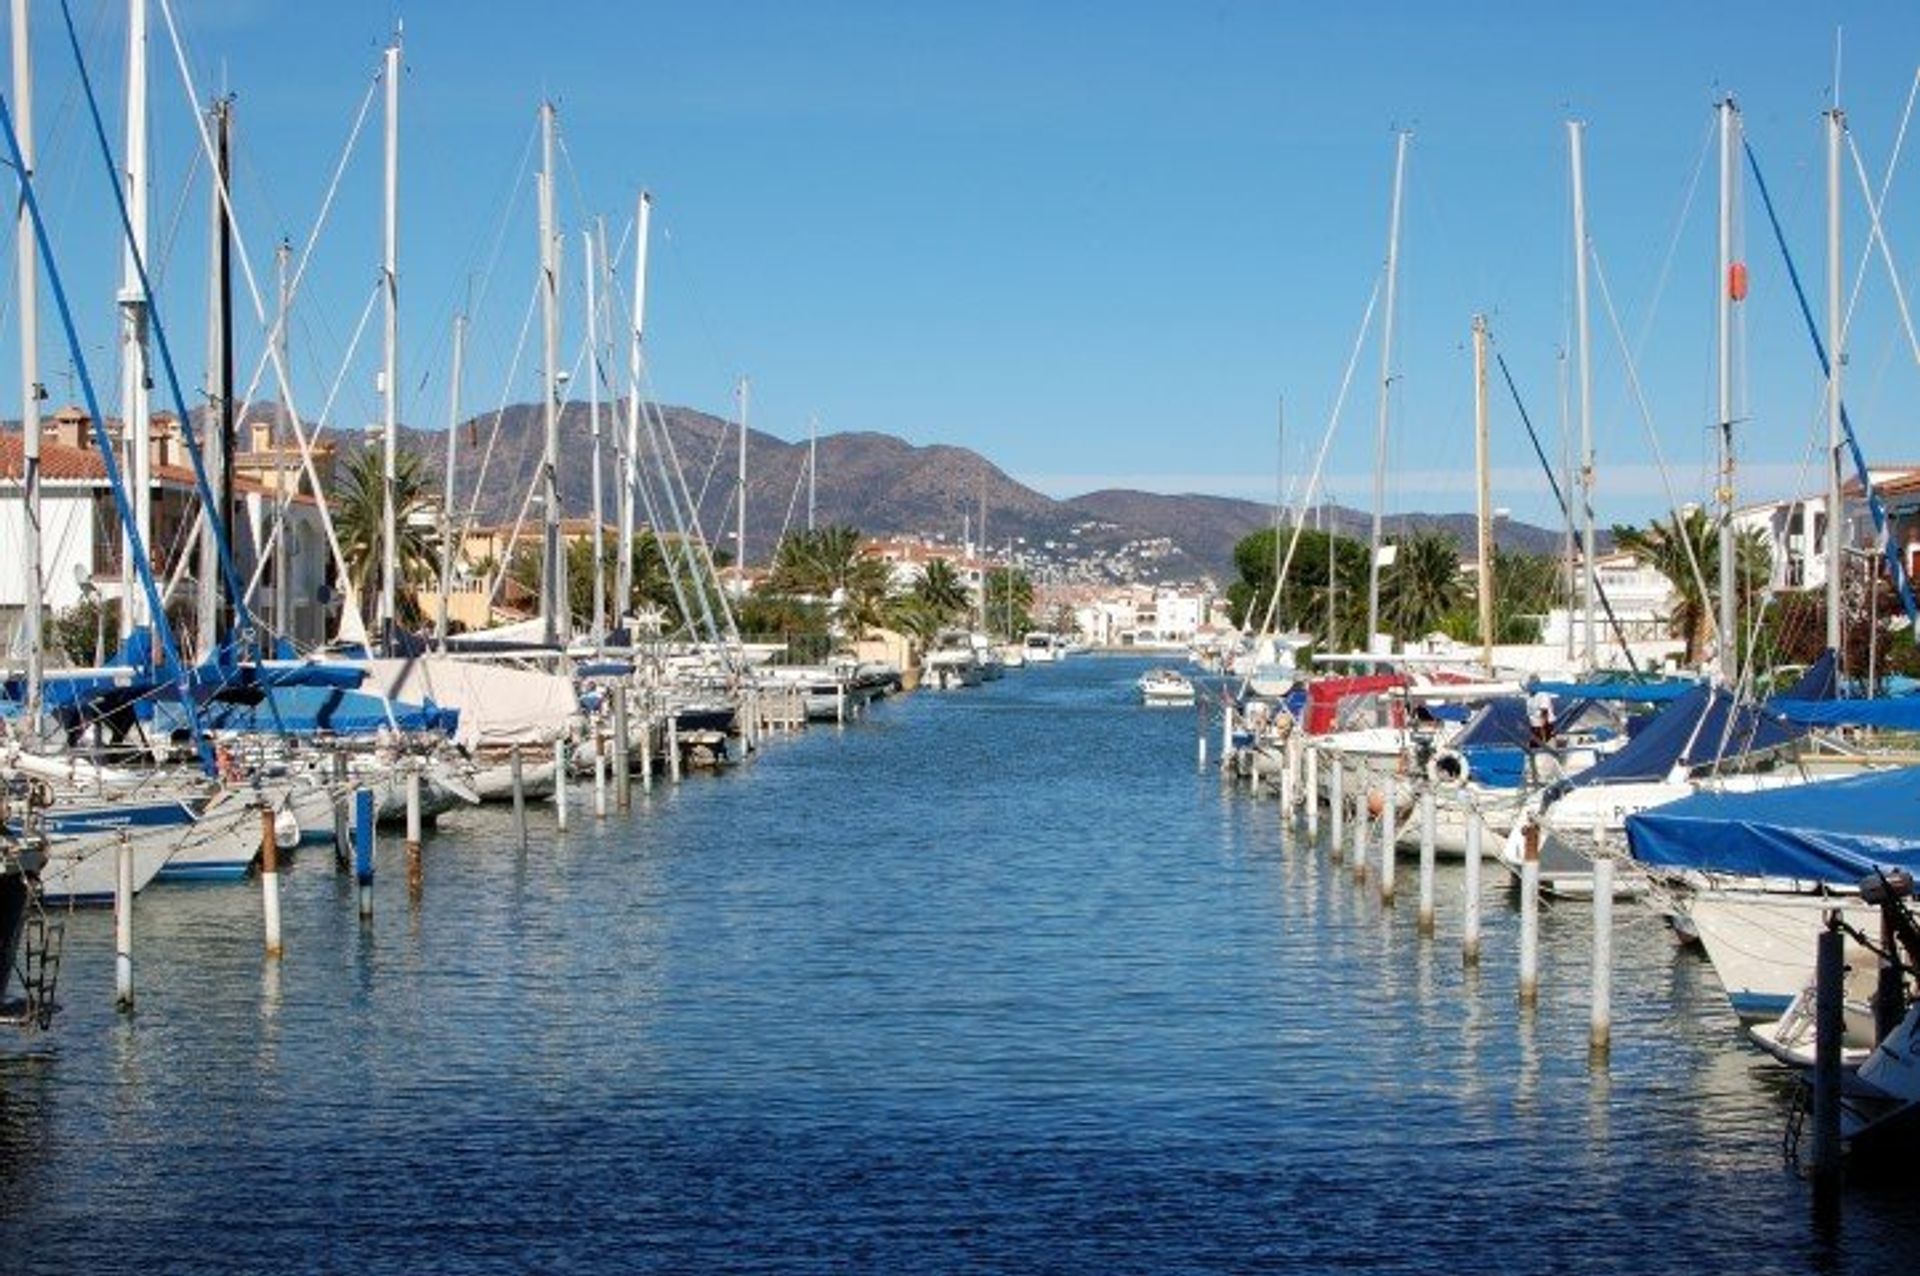 Empuriabrava is home to the largest marina in Europe